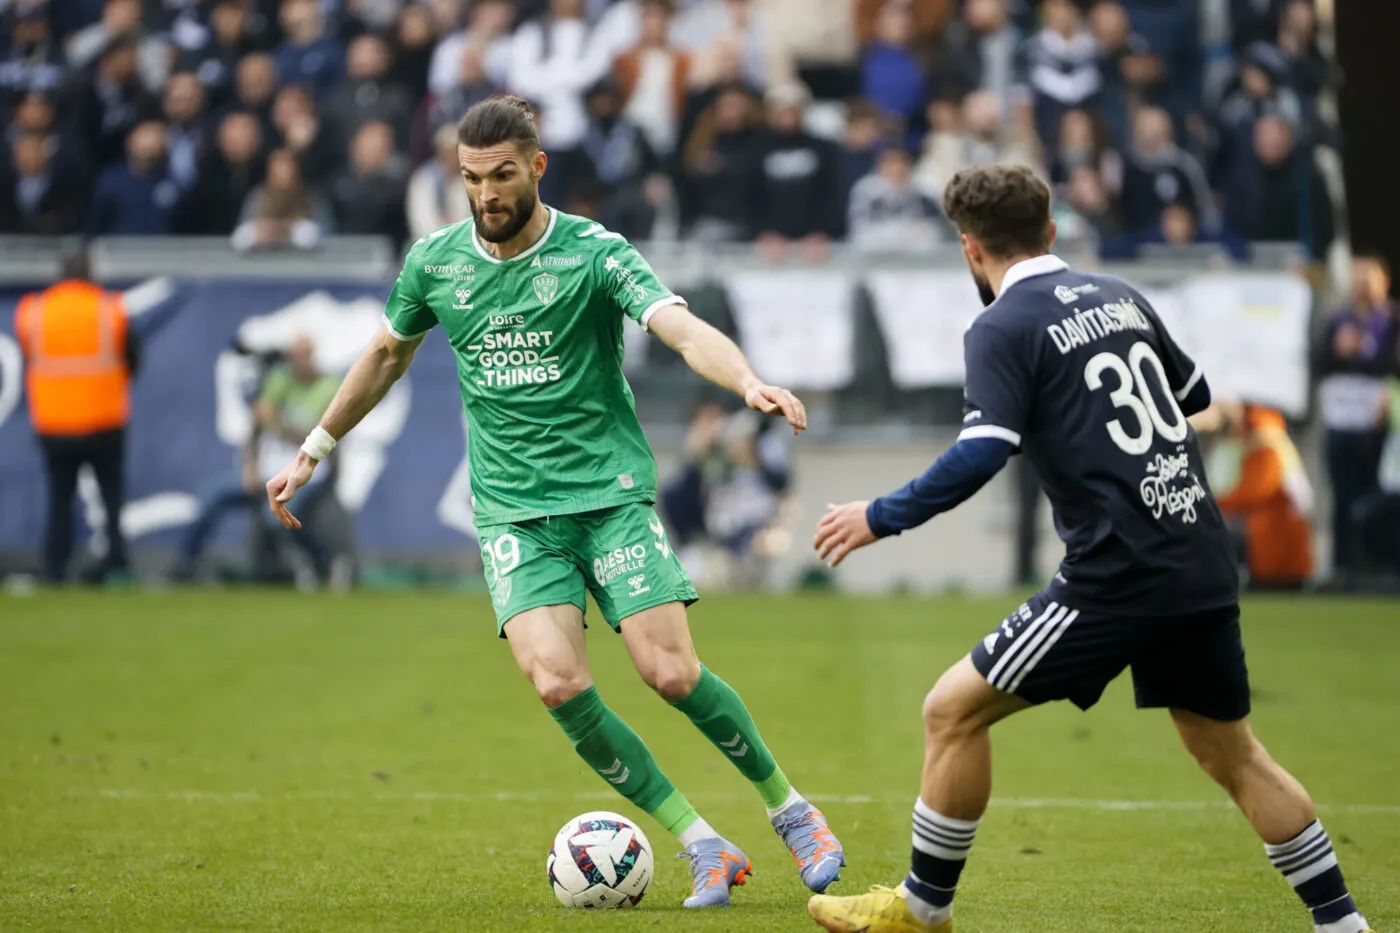 19 Leo PETROT (asse) during the Ligue 2 BKT match between Bordeaux and Saint Etienne at Stade Matmut Atlantique on March 4, 2023 in Bordeaux, France. (Photo by Romain Perrocheau/FEP/Icon Sport)